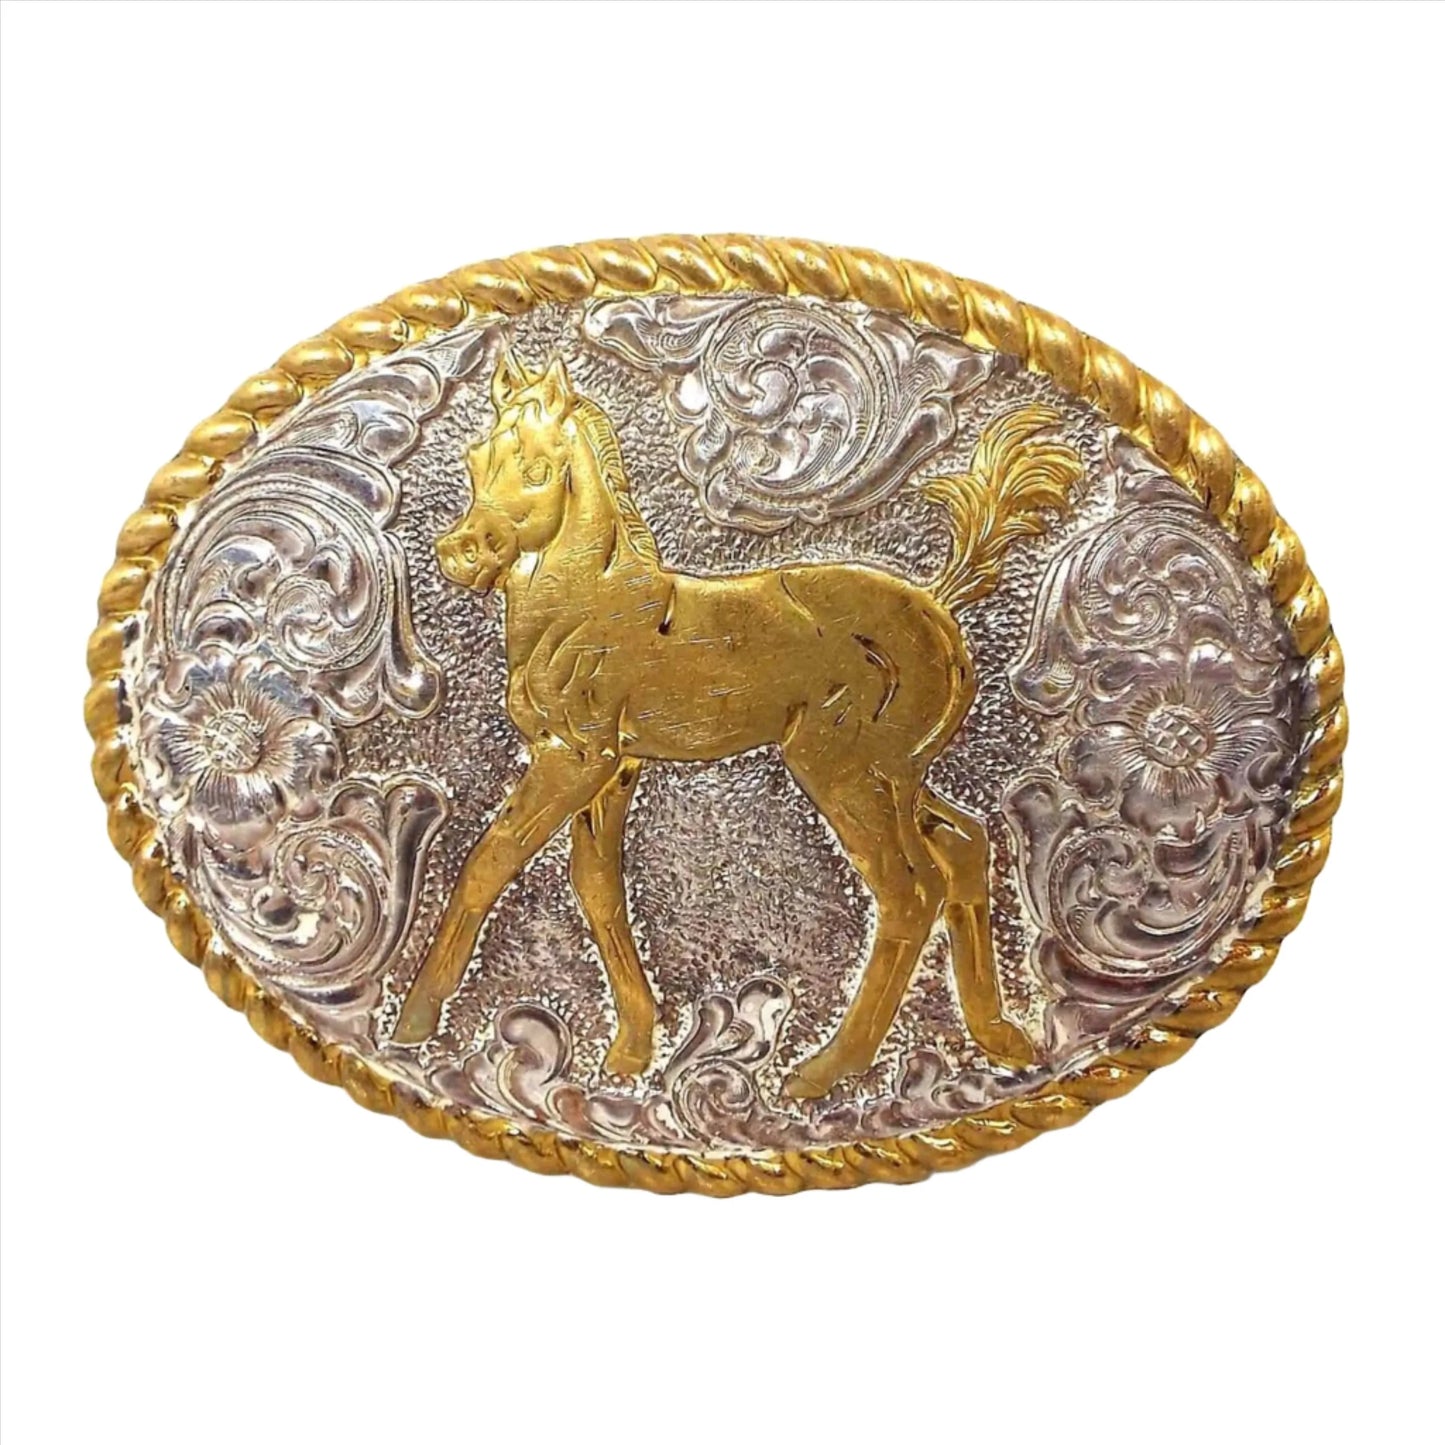 Front view of the retro vintage Crumrine horse belt buckle. It is silver tone in color with a bronze twisted rope design edge and pony on the front. The rest of the buckle has a floral design.